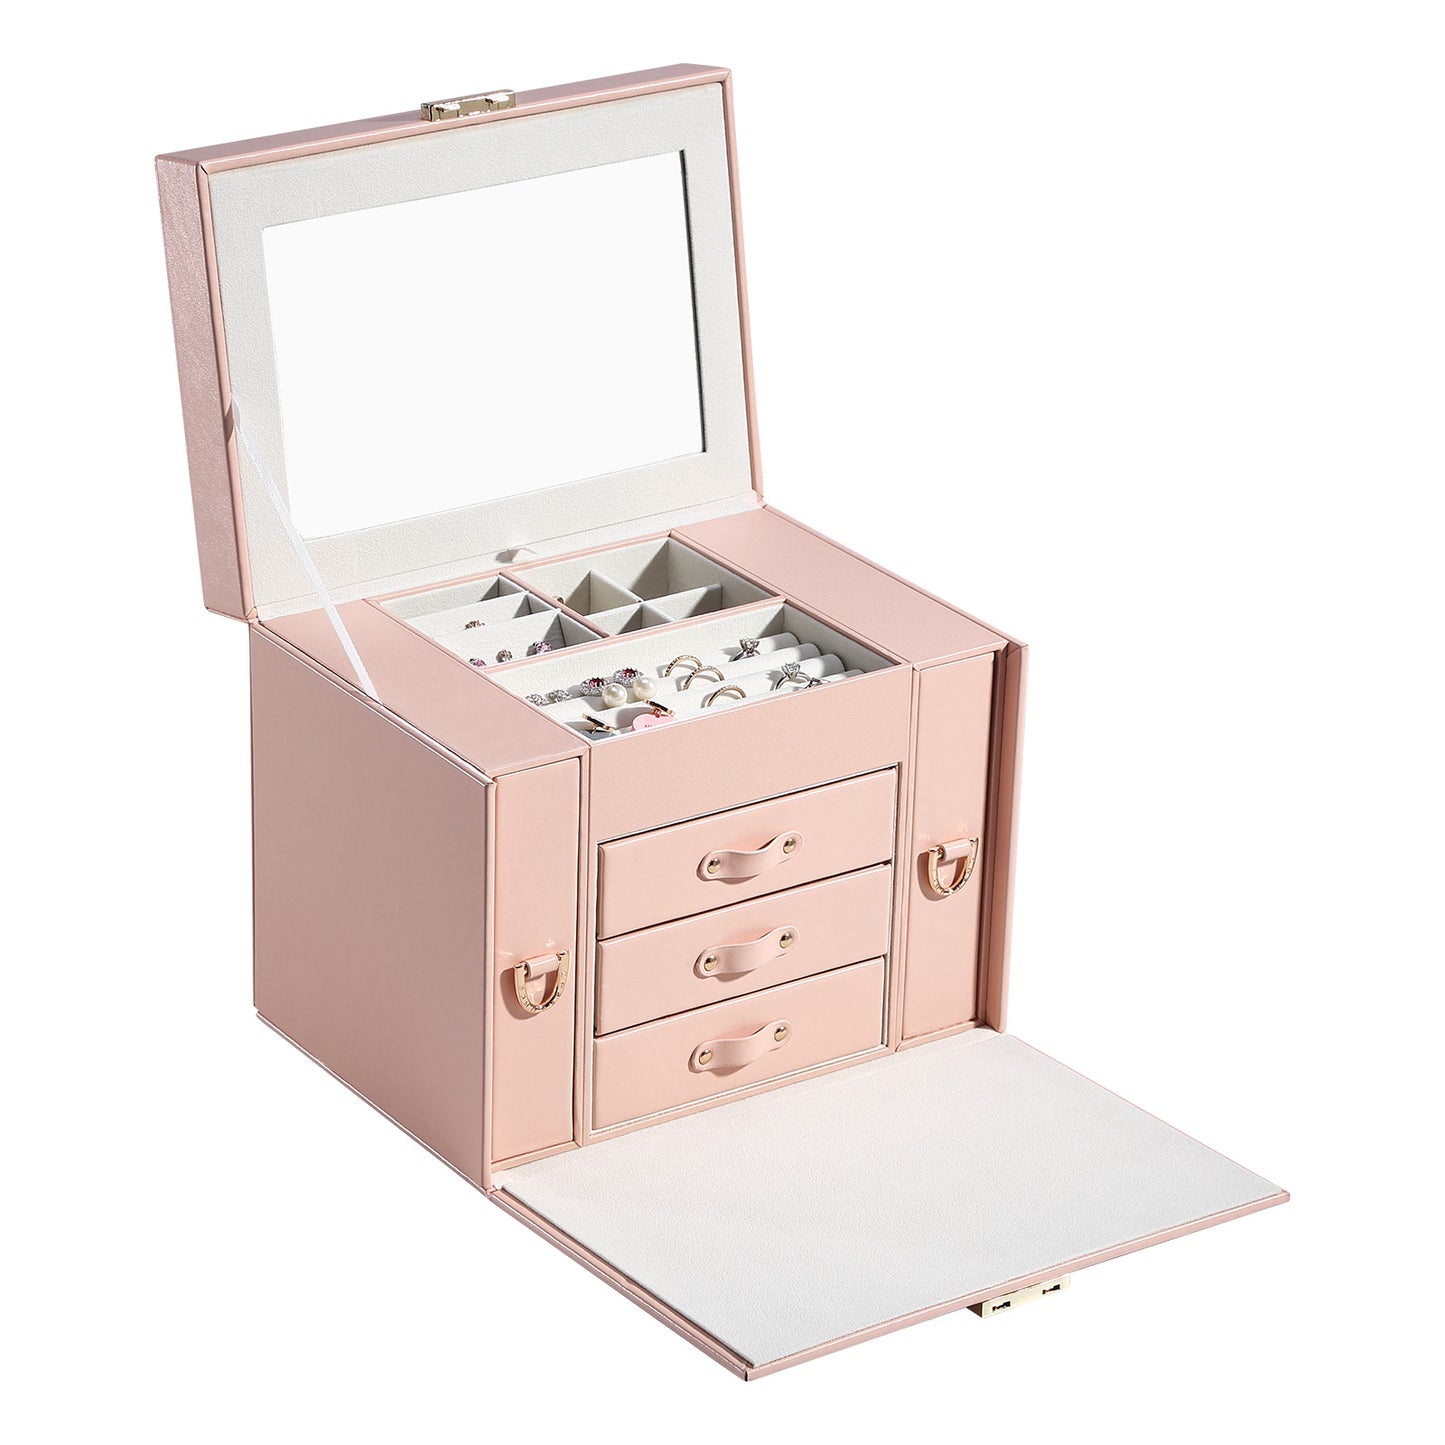 Supersize Jewelry Box with Lock and Mirror, Christmas Gift for Women Lady Girls